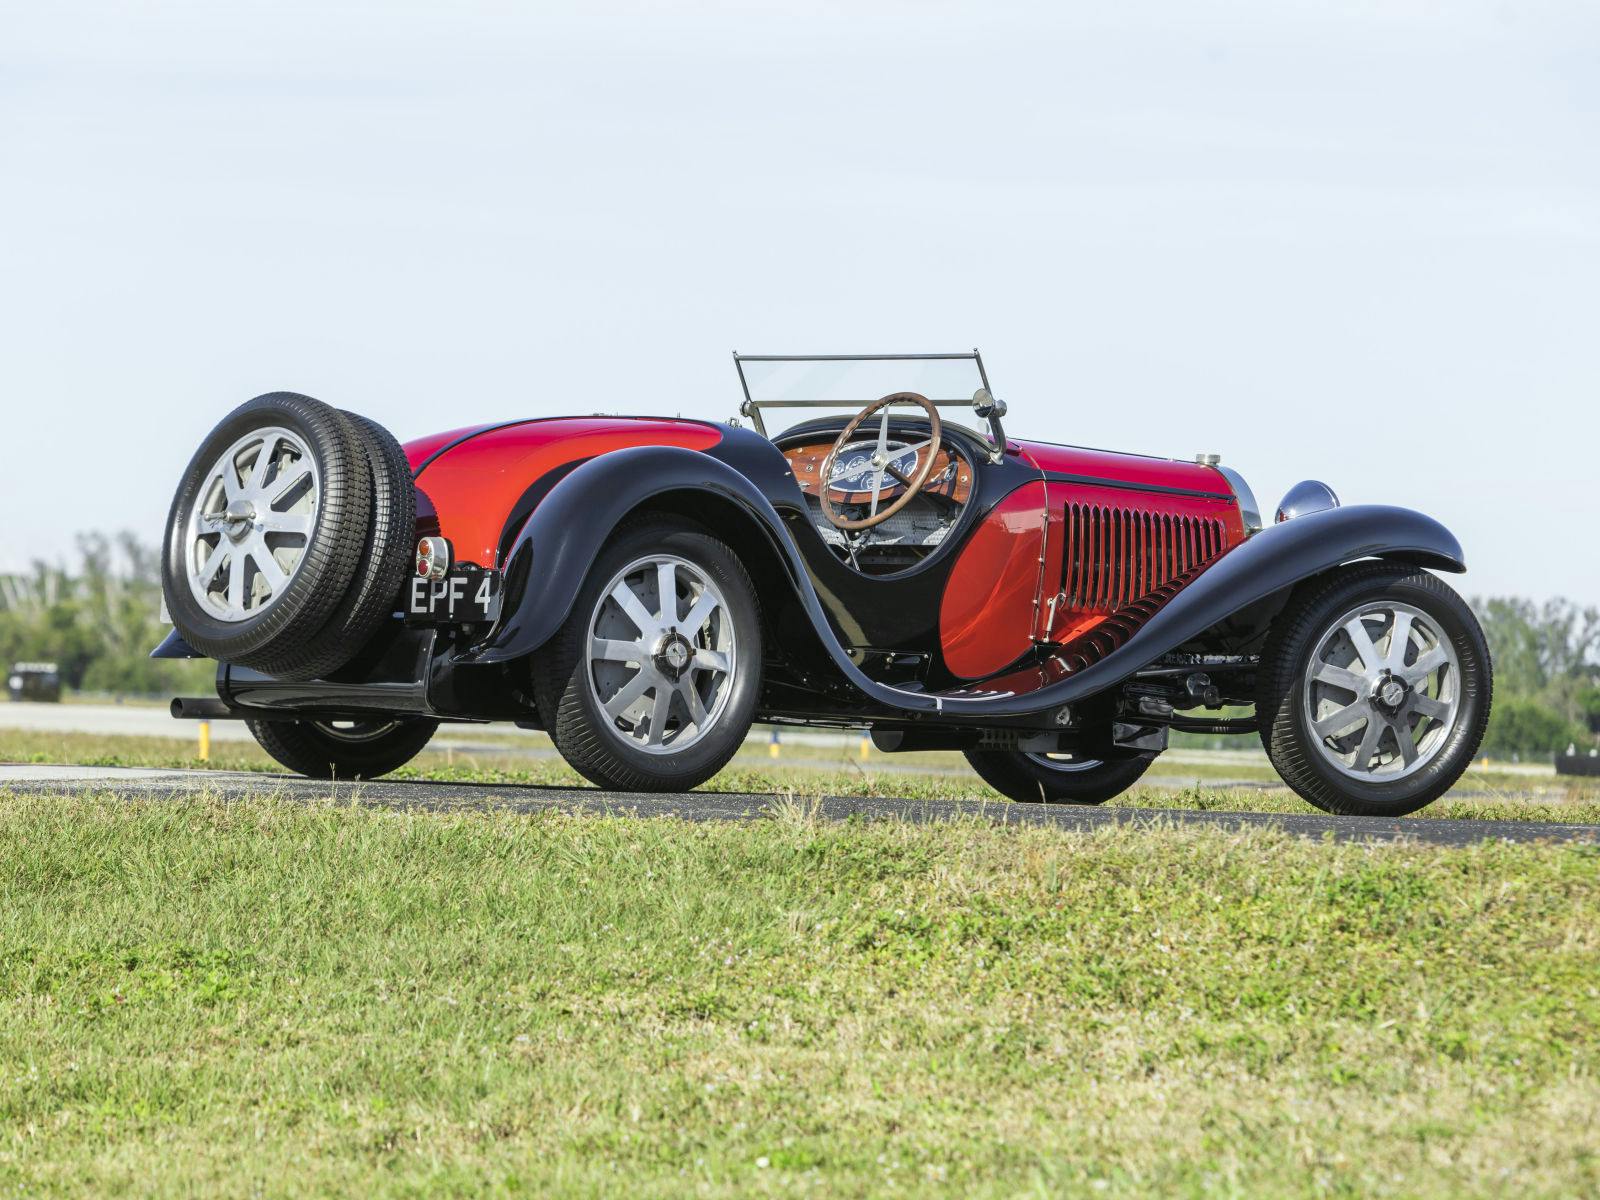 The 1932 Bugatti Type 55 Super Sport Roadster was auctioned for $ 7.1 million.